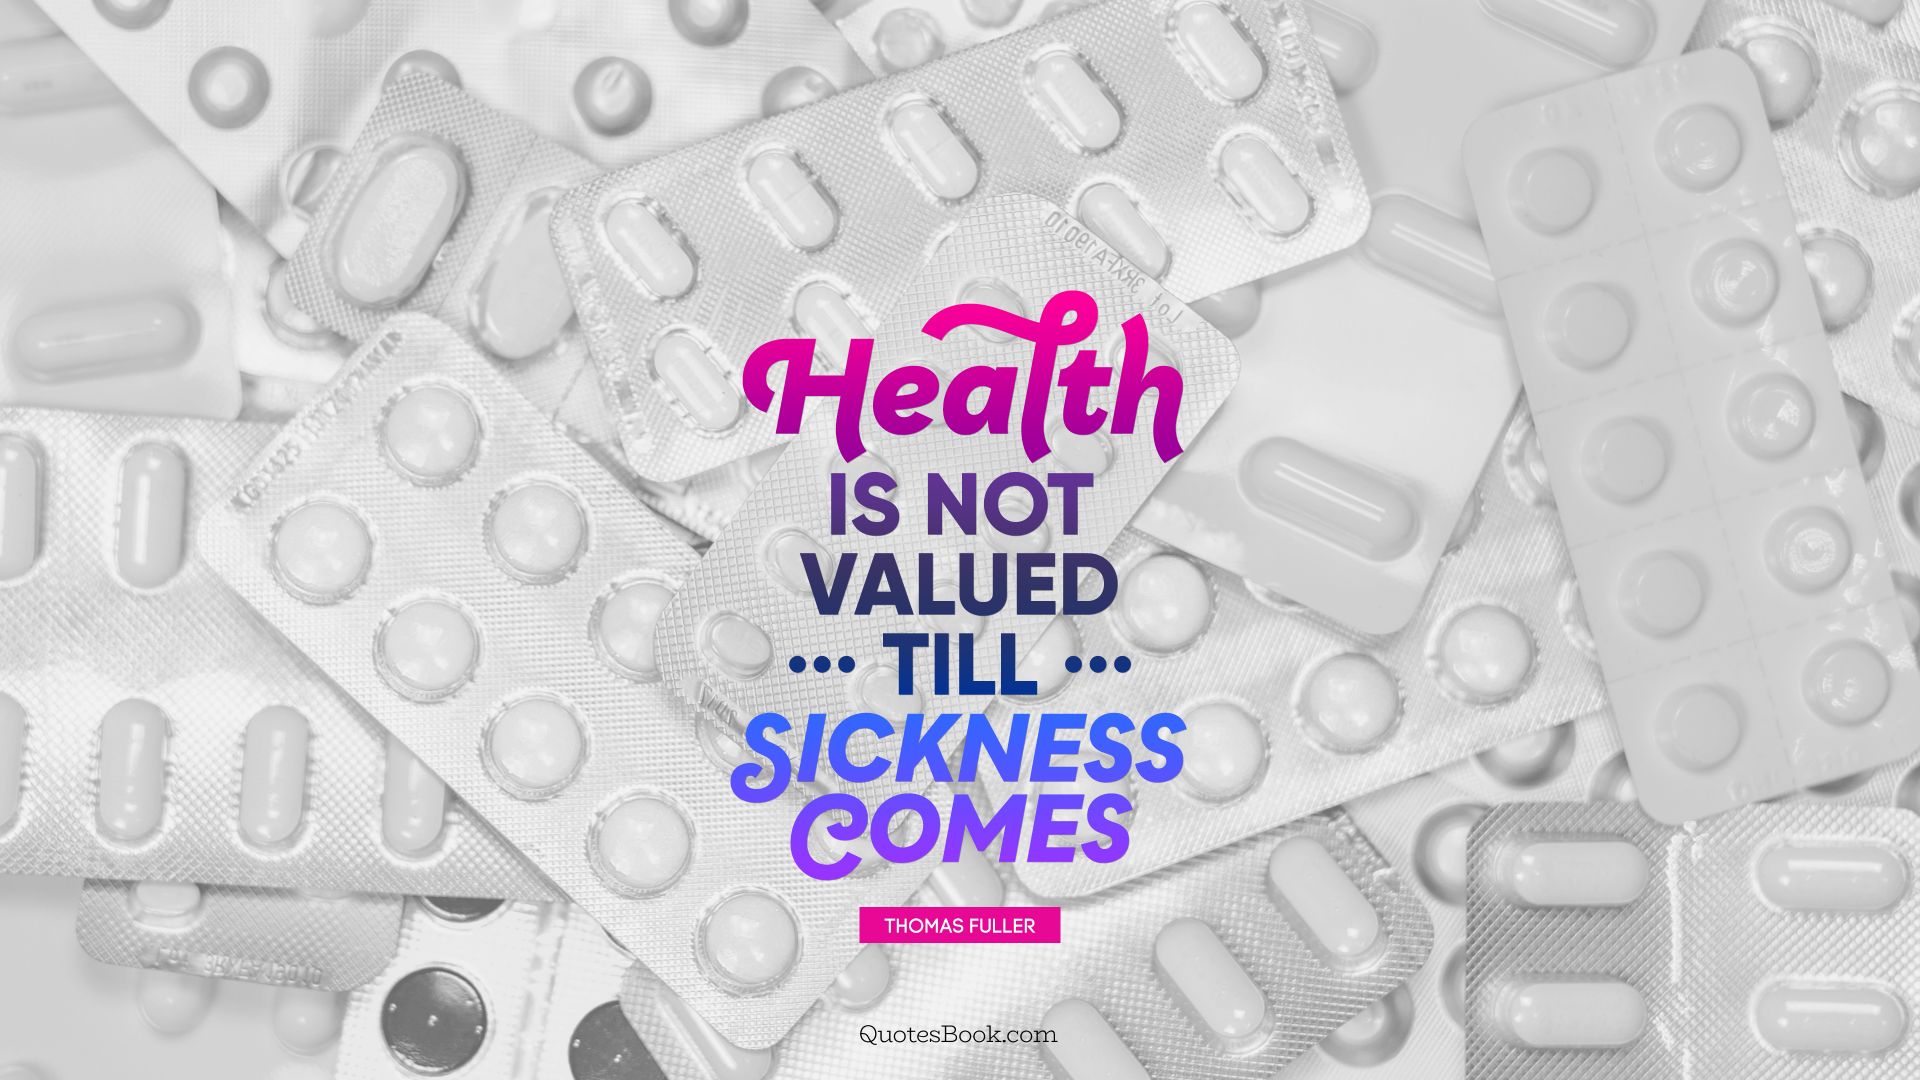 Health is not valued till sickness comes. - Quote by Thomas Fuller